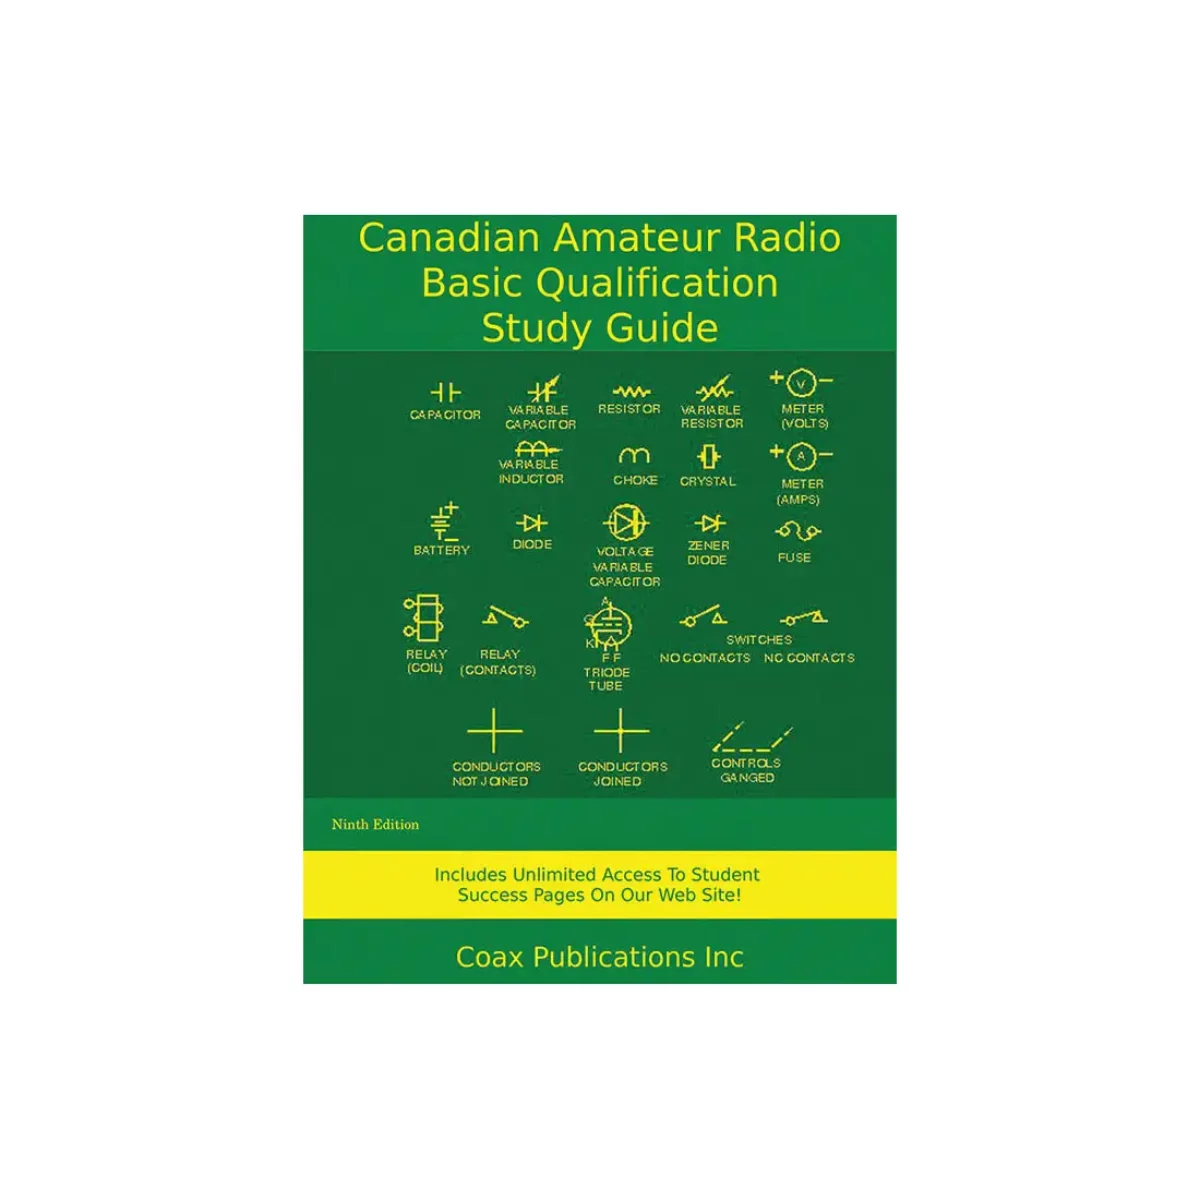 Canadian Amateur Radio Basic Qualification Study Guide - 9th Edition